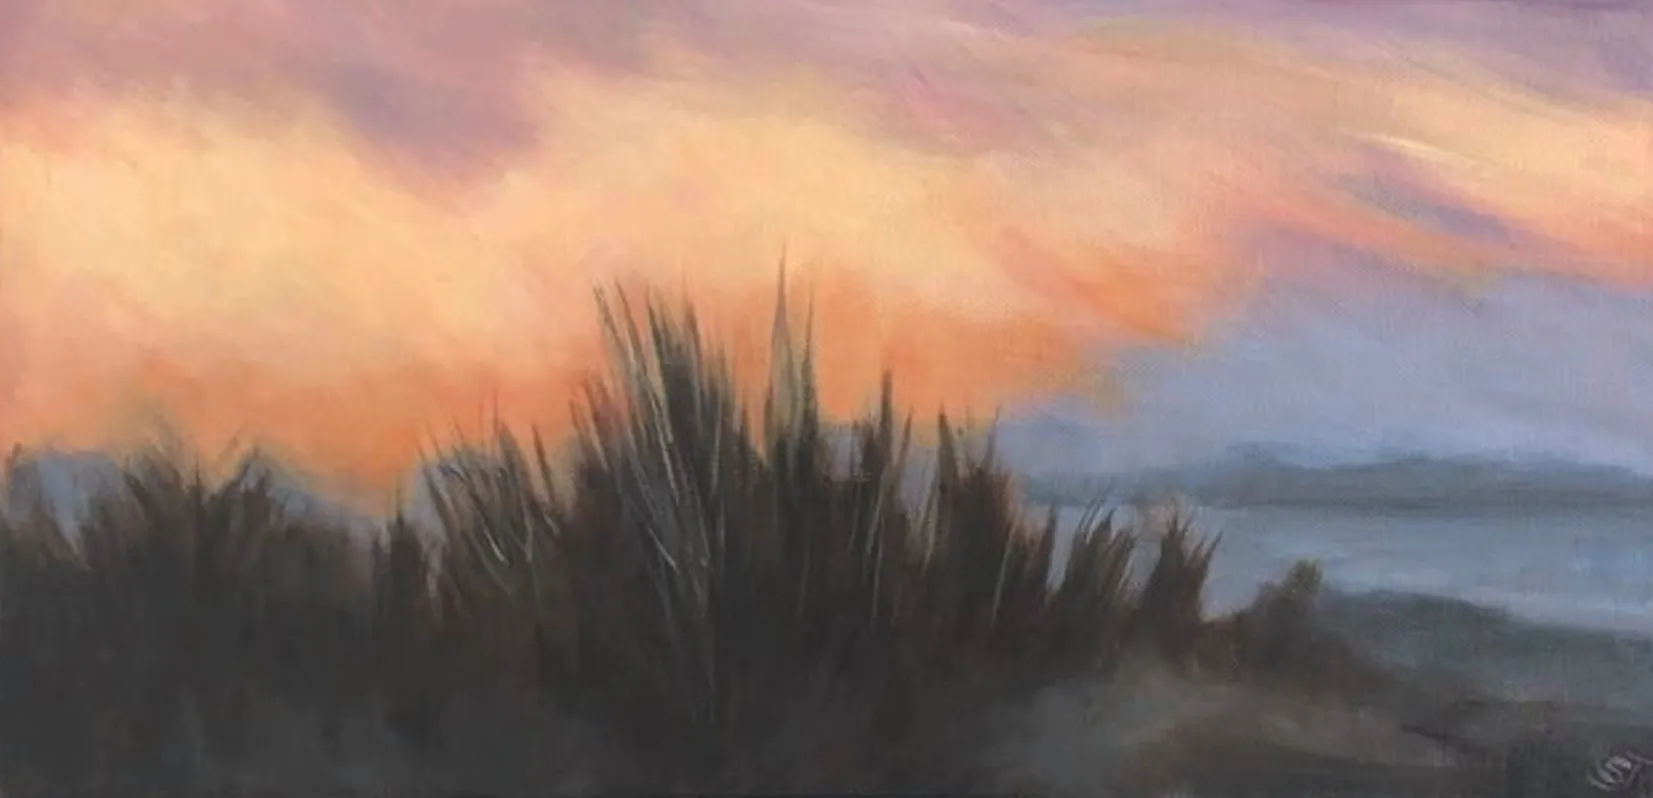 acrylic painting of a beach at sunset by artist Shona Jones